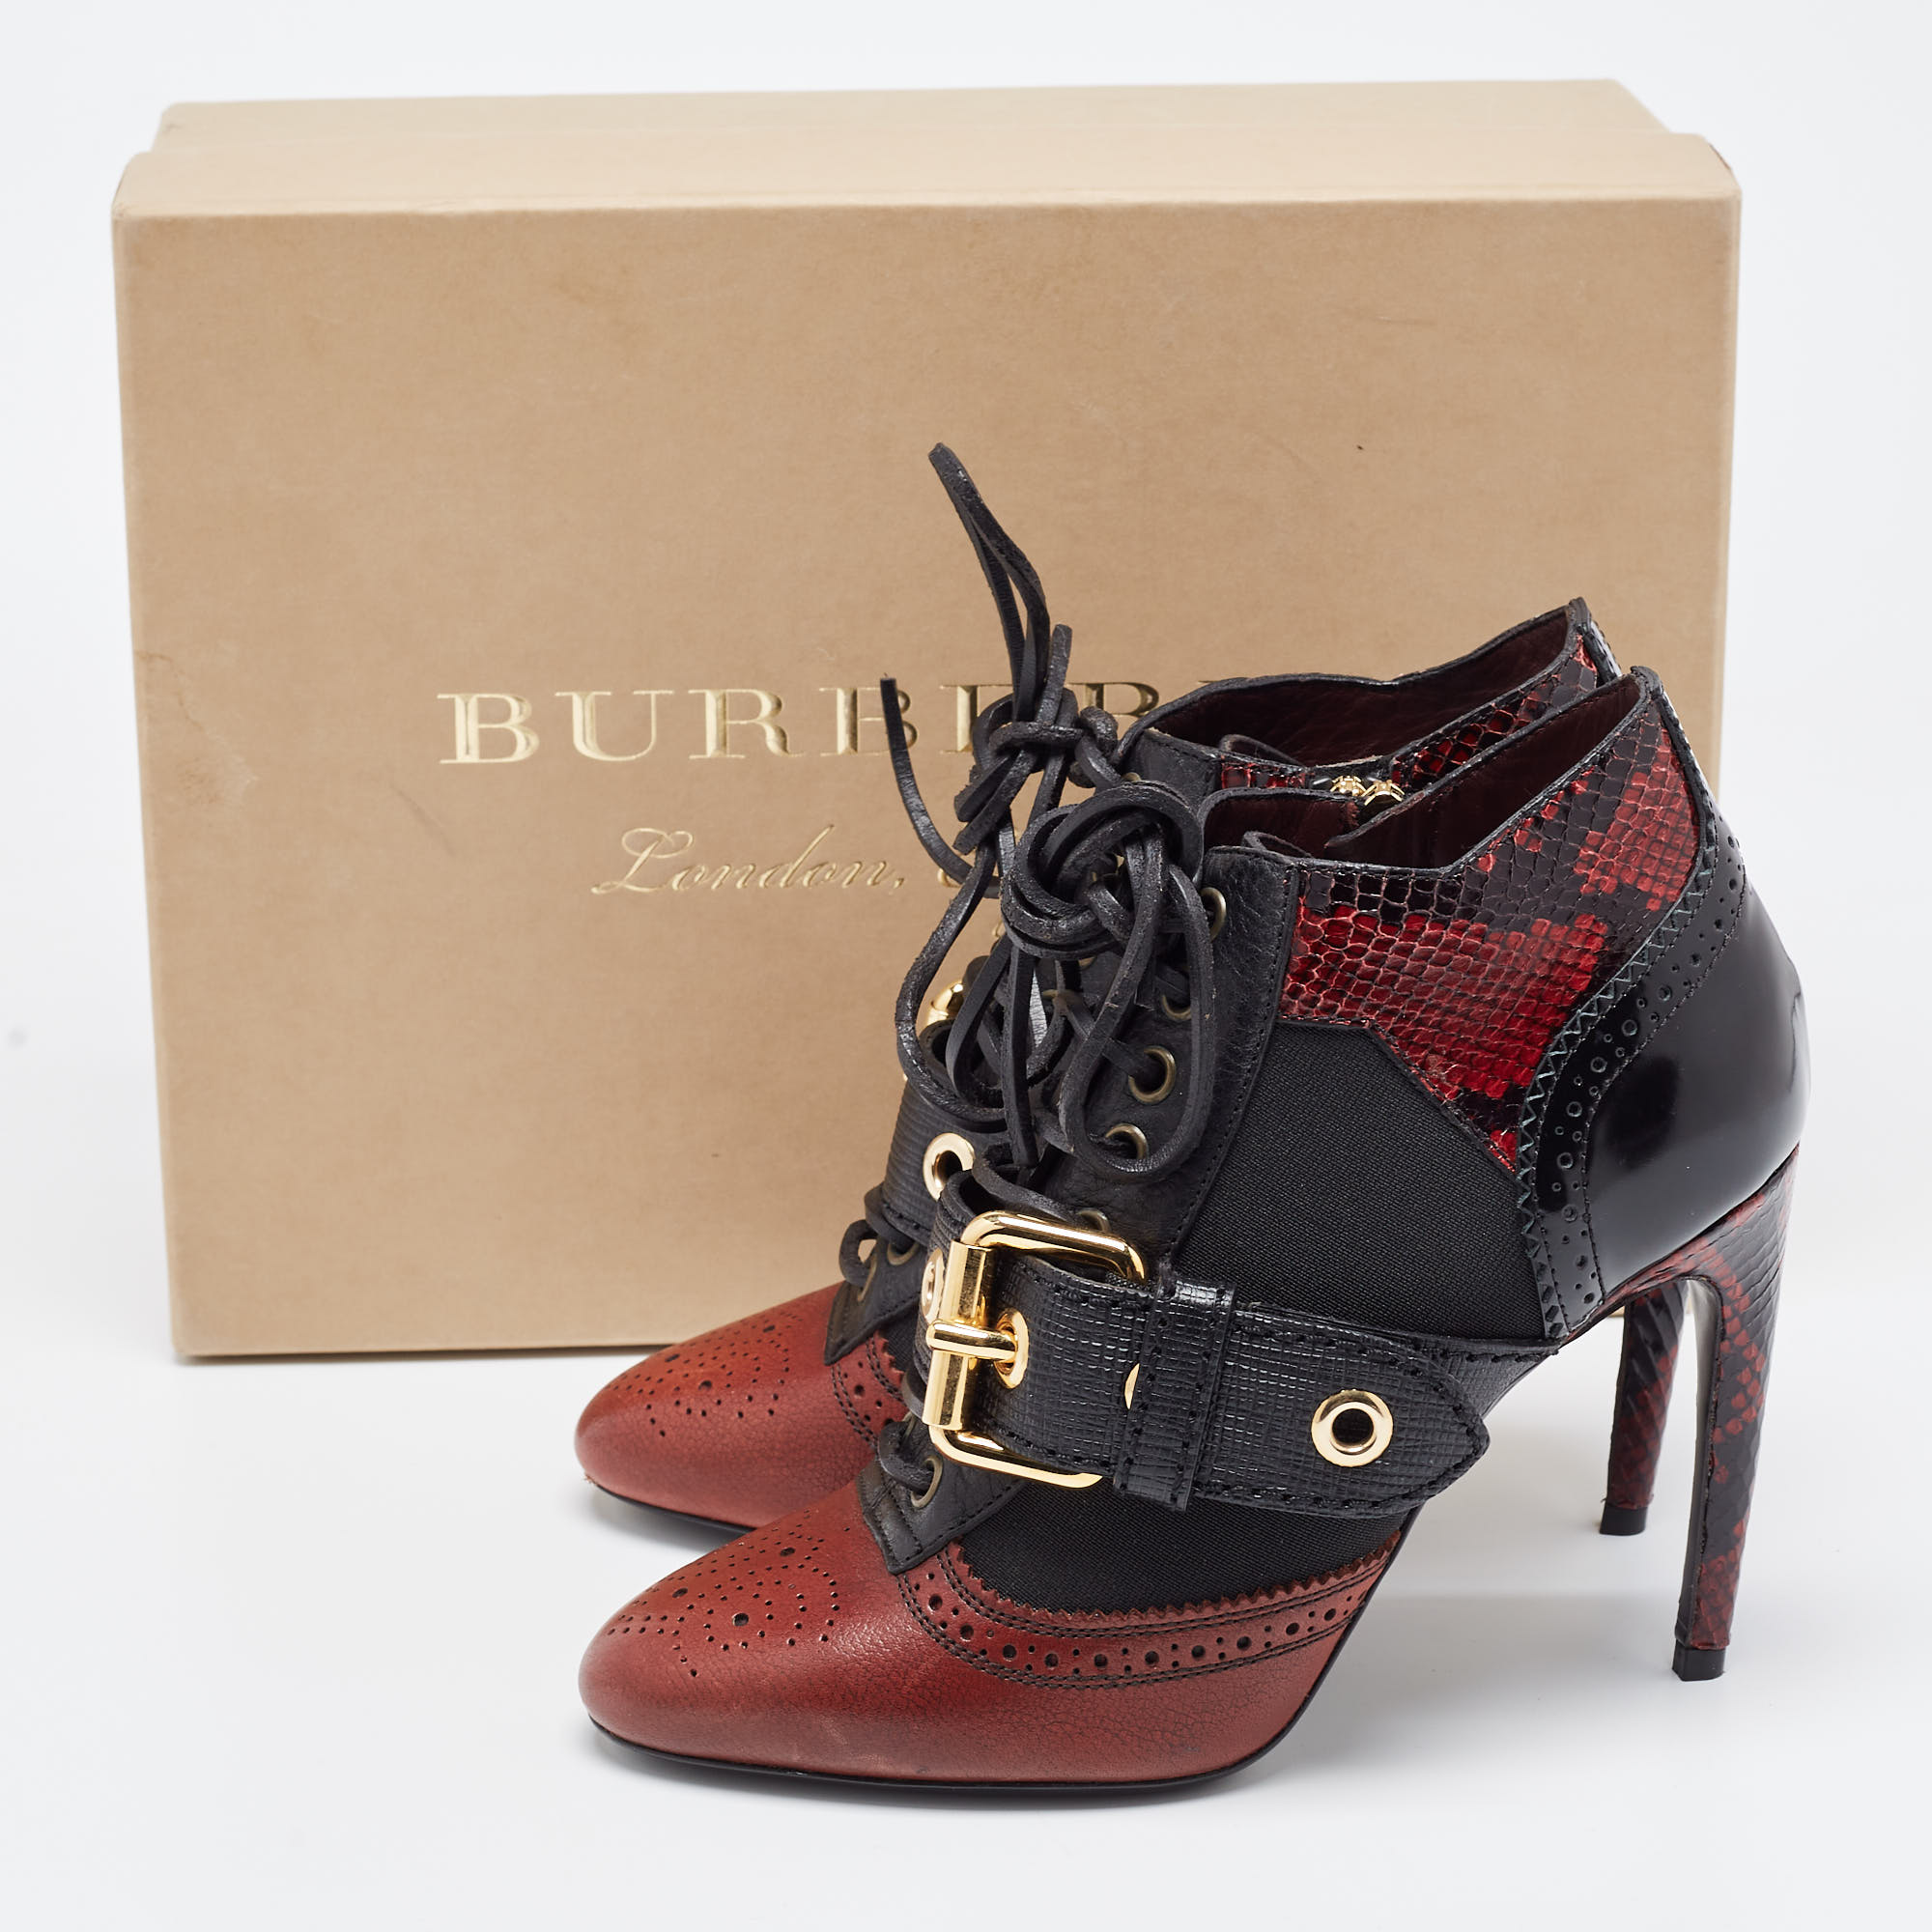 Burberry Black/Burgundy Leather And Python Embossed Westmarsh Buckle Ankle Boots Size 36